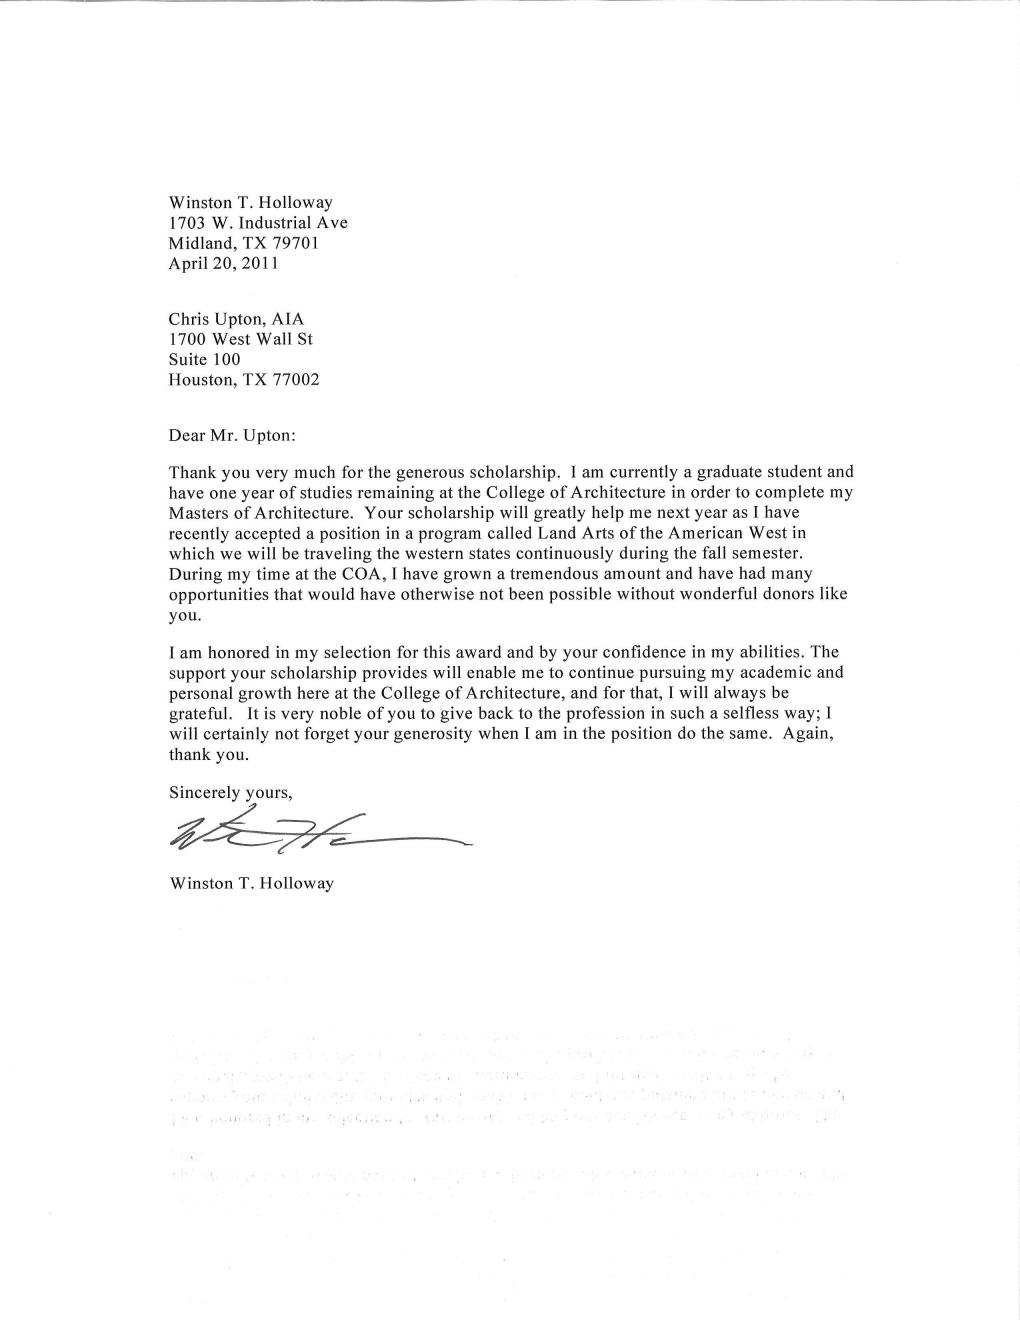 Scholarship Thank You Letter Template - Thank You Letter for Scholarship format Letter format